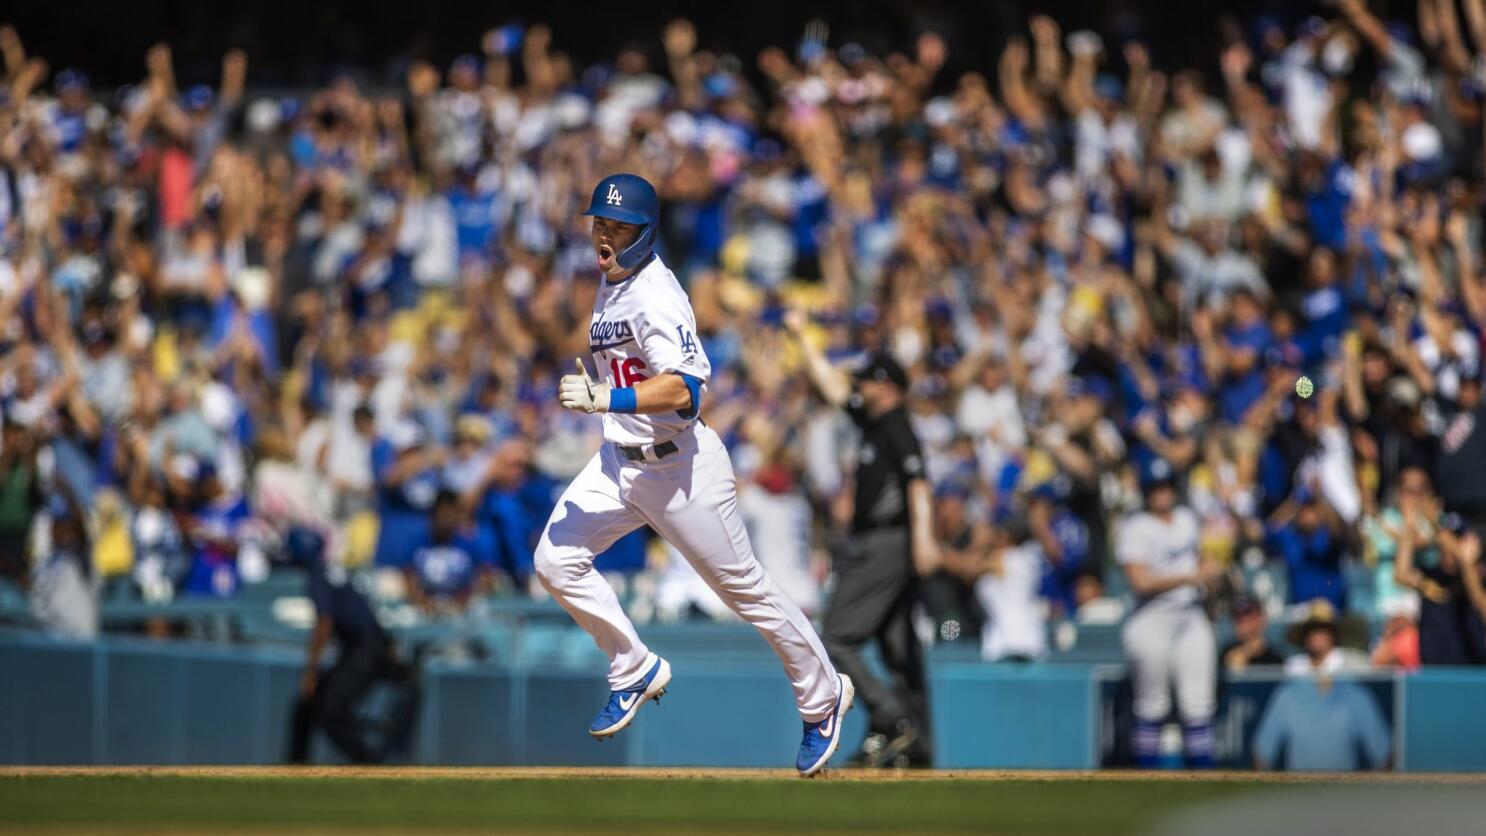 3-RUN WALK-OFF SHOT FOR DODGERS!! Will Smith launches CLUTCH comeback  shot!! 